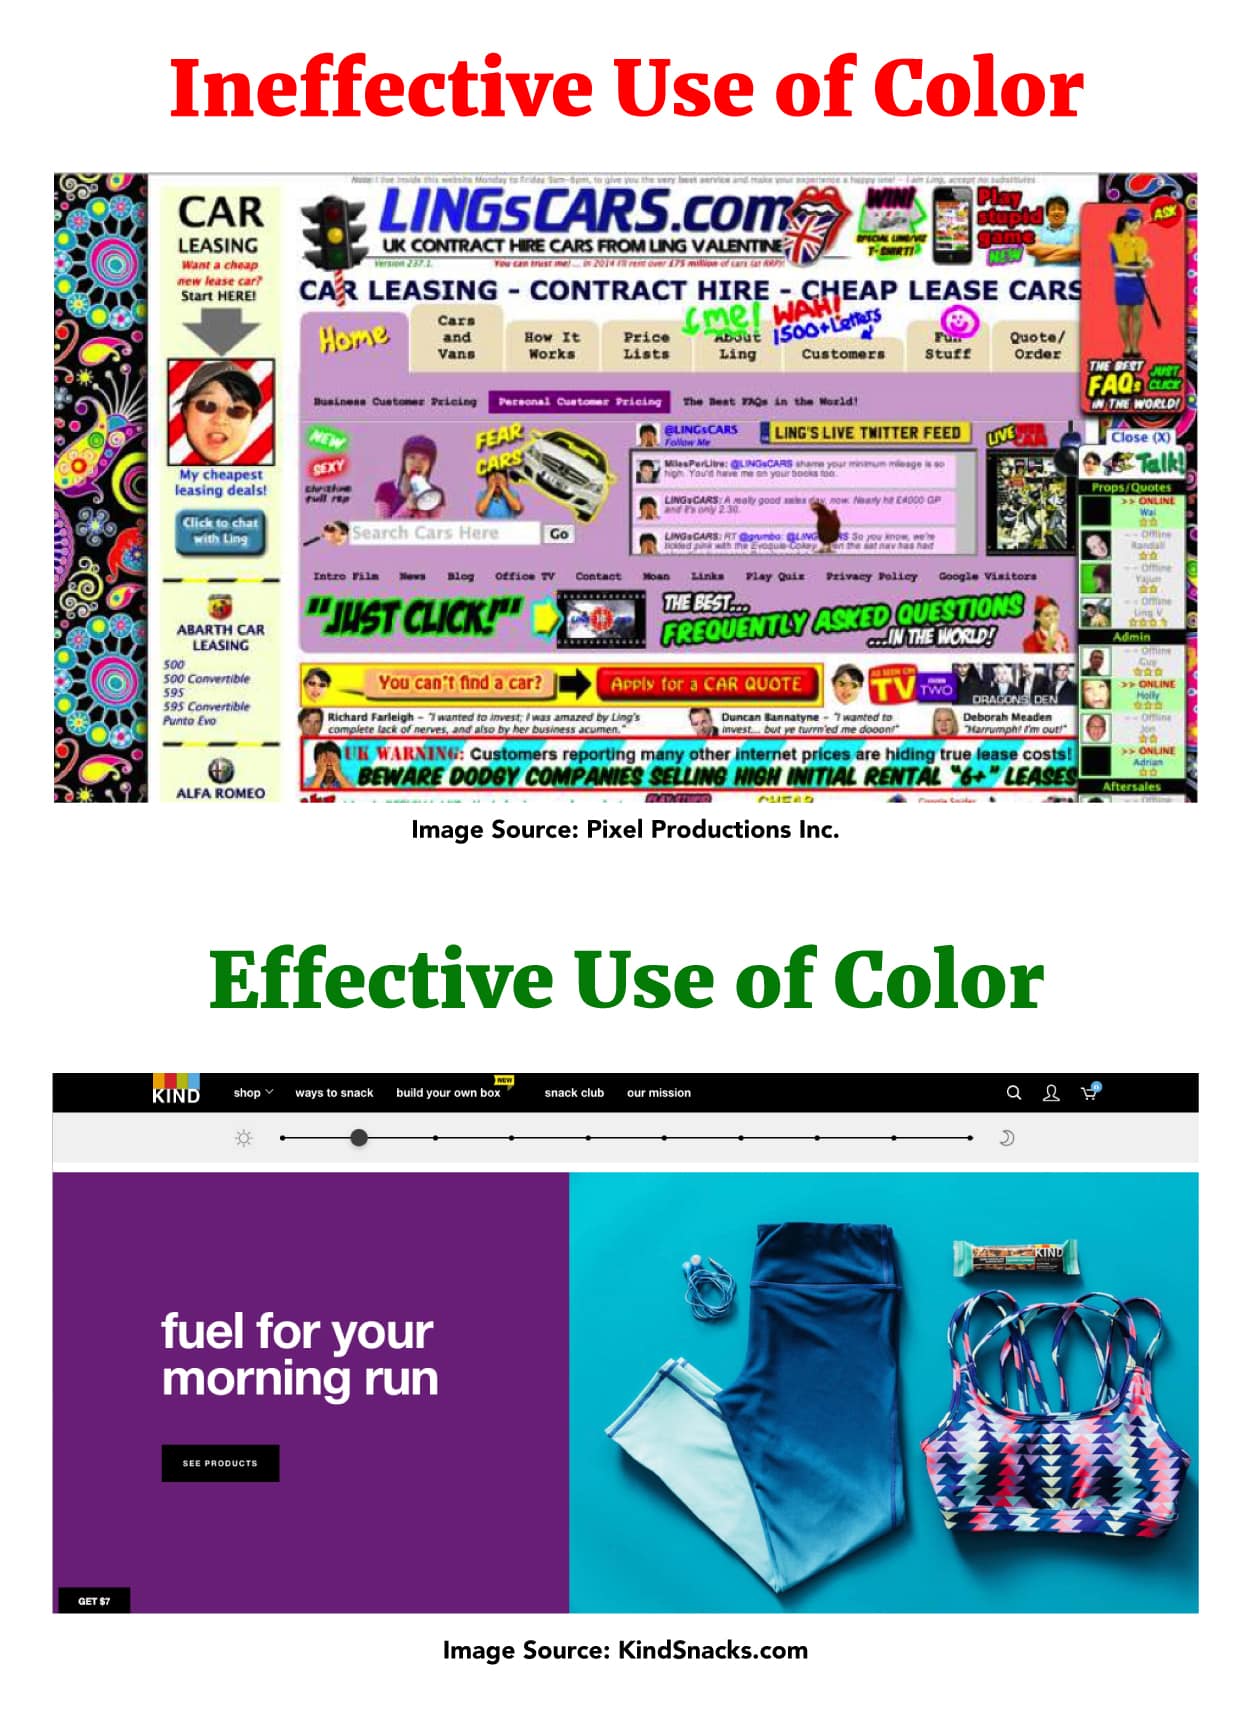 Ineffective vs. Effective Use of Color